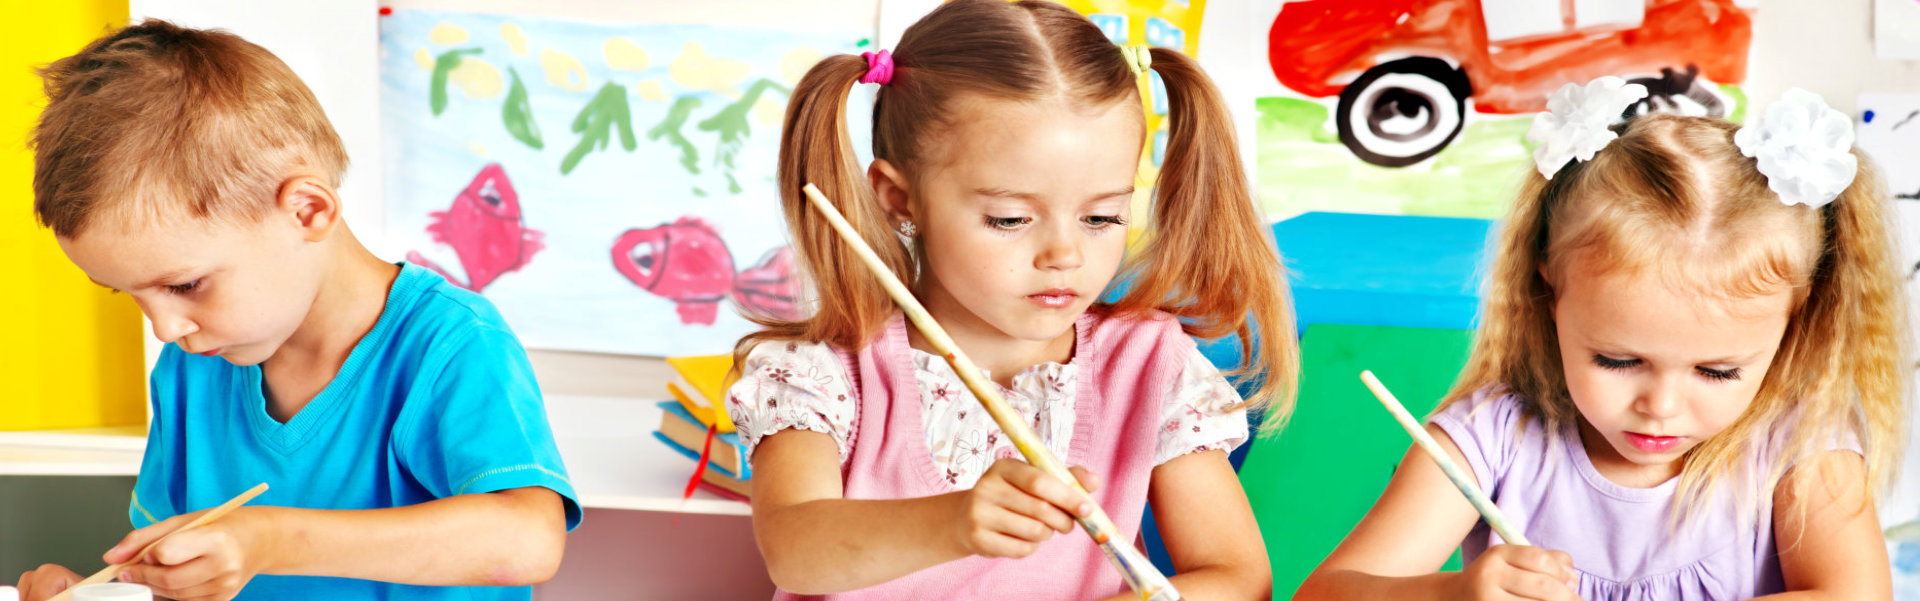 children painting at easel in school